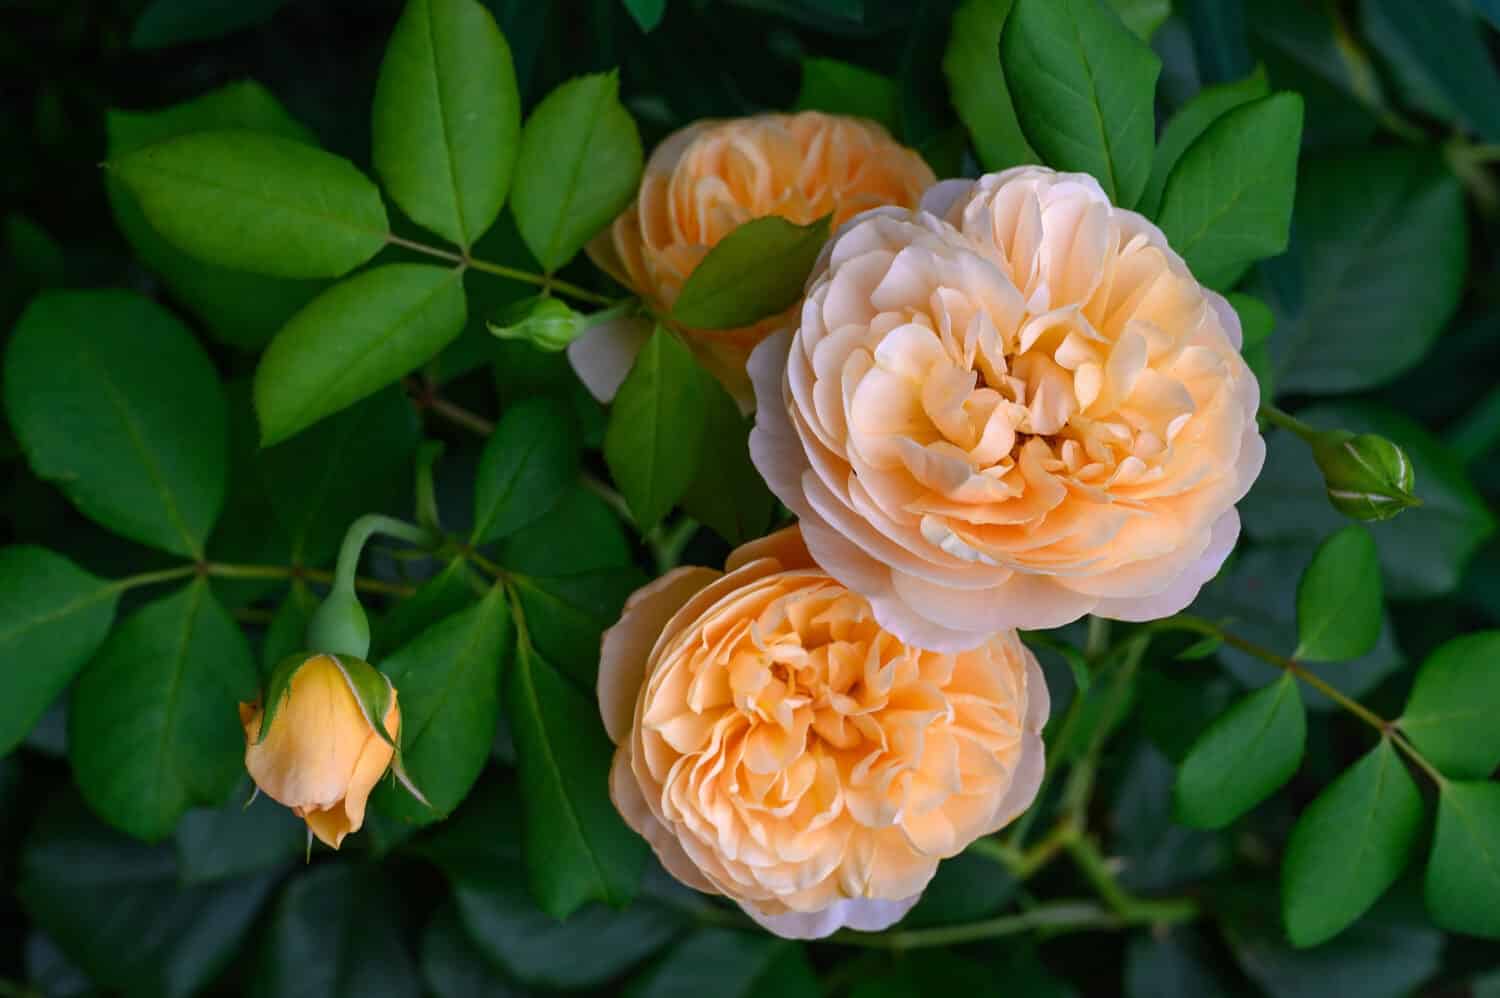 Apricot colored English Rose 'Roald Dahl' in flower